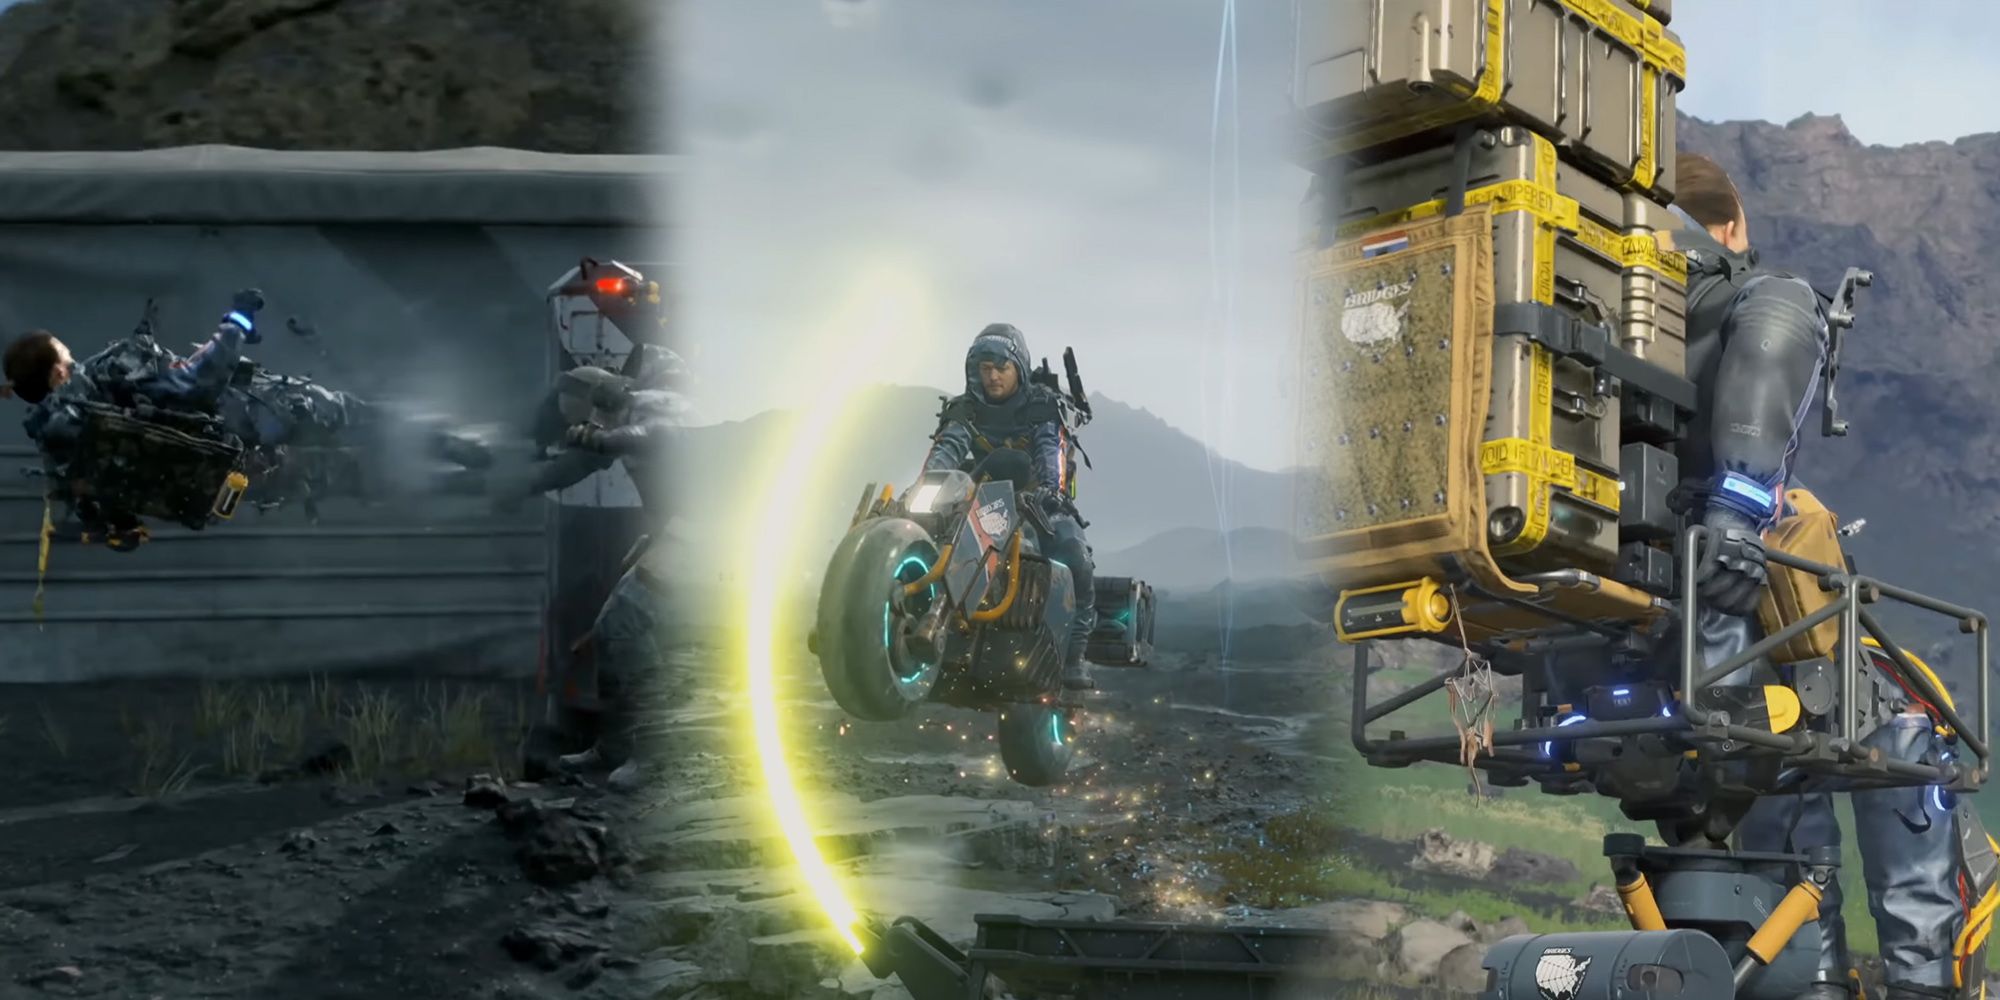 Death Stranding - Some Examples Of Hidden Mechanics In The Director's Cut Such As Riding The Buddy Bot, Doing Tricks On The Reverse Trike, And Dropkicking A Mule